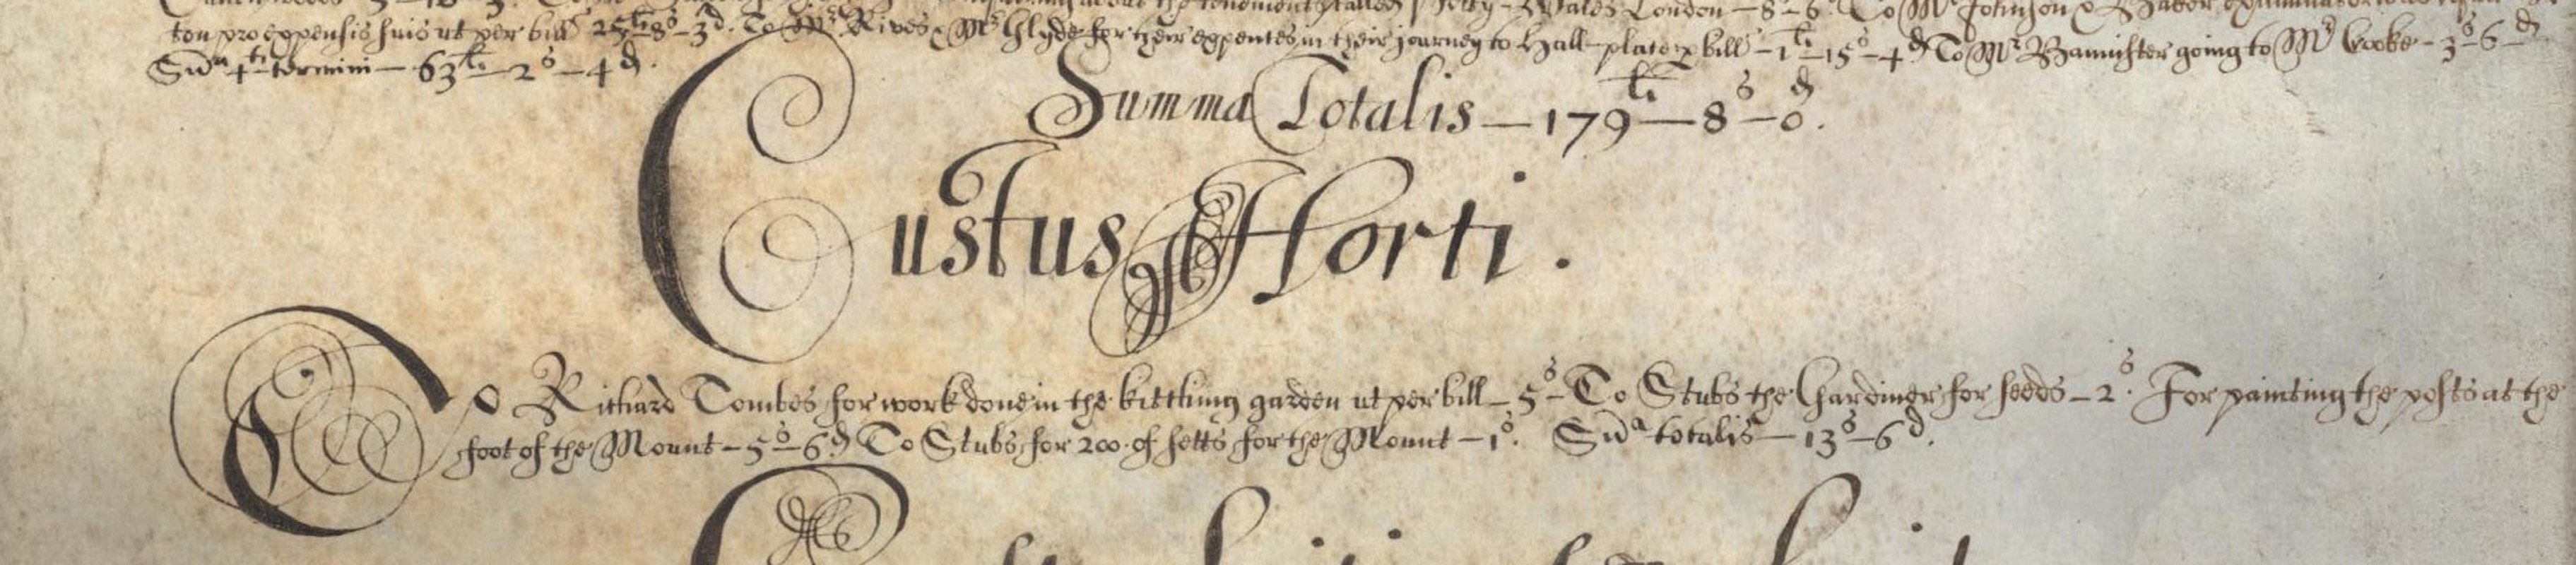 NCA 7675, New College garden account payment to (inter alia) Stubbs the gardener for work on The Mound, 1653-54